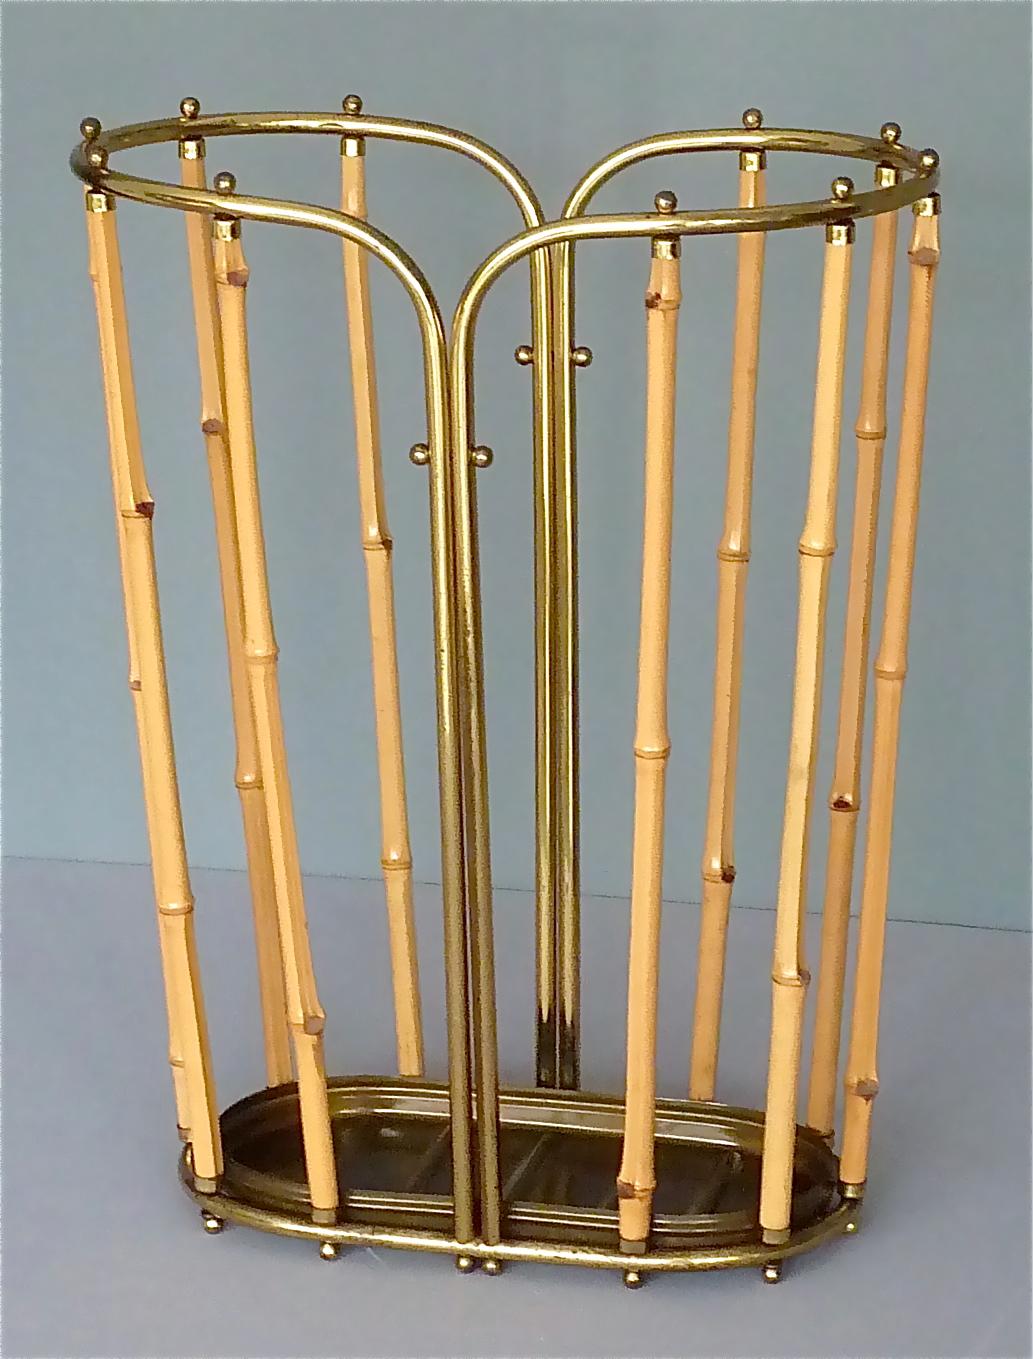 Exceptional 1950s Austrian modernist umbrella stand, which probably belongs to one of the wonderful designs by Aubock, Hagenauer, Josef Frank for Haus & Garten or Kalmar. It is made of bamboo and tubular brass with lovely small ball screw nuts. The